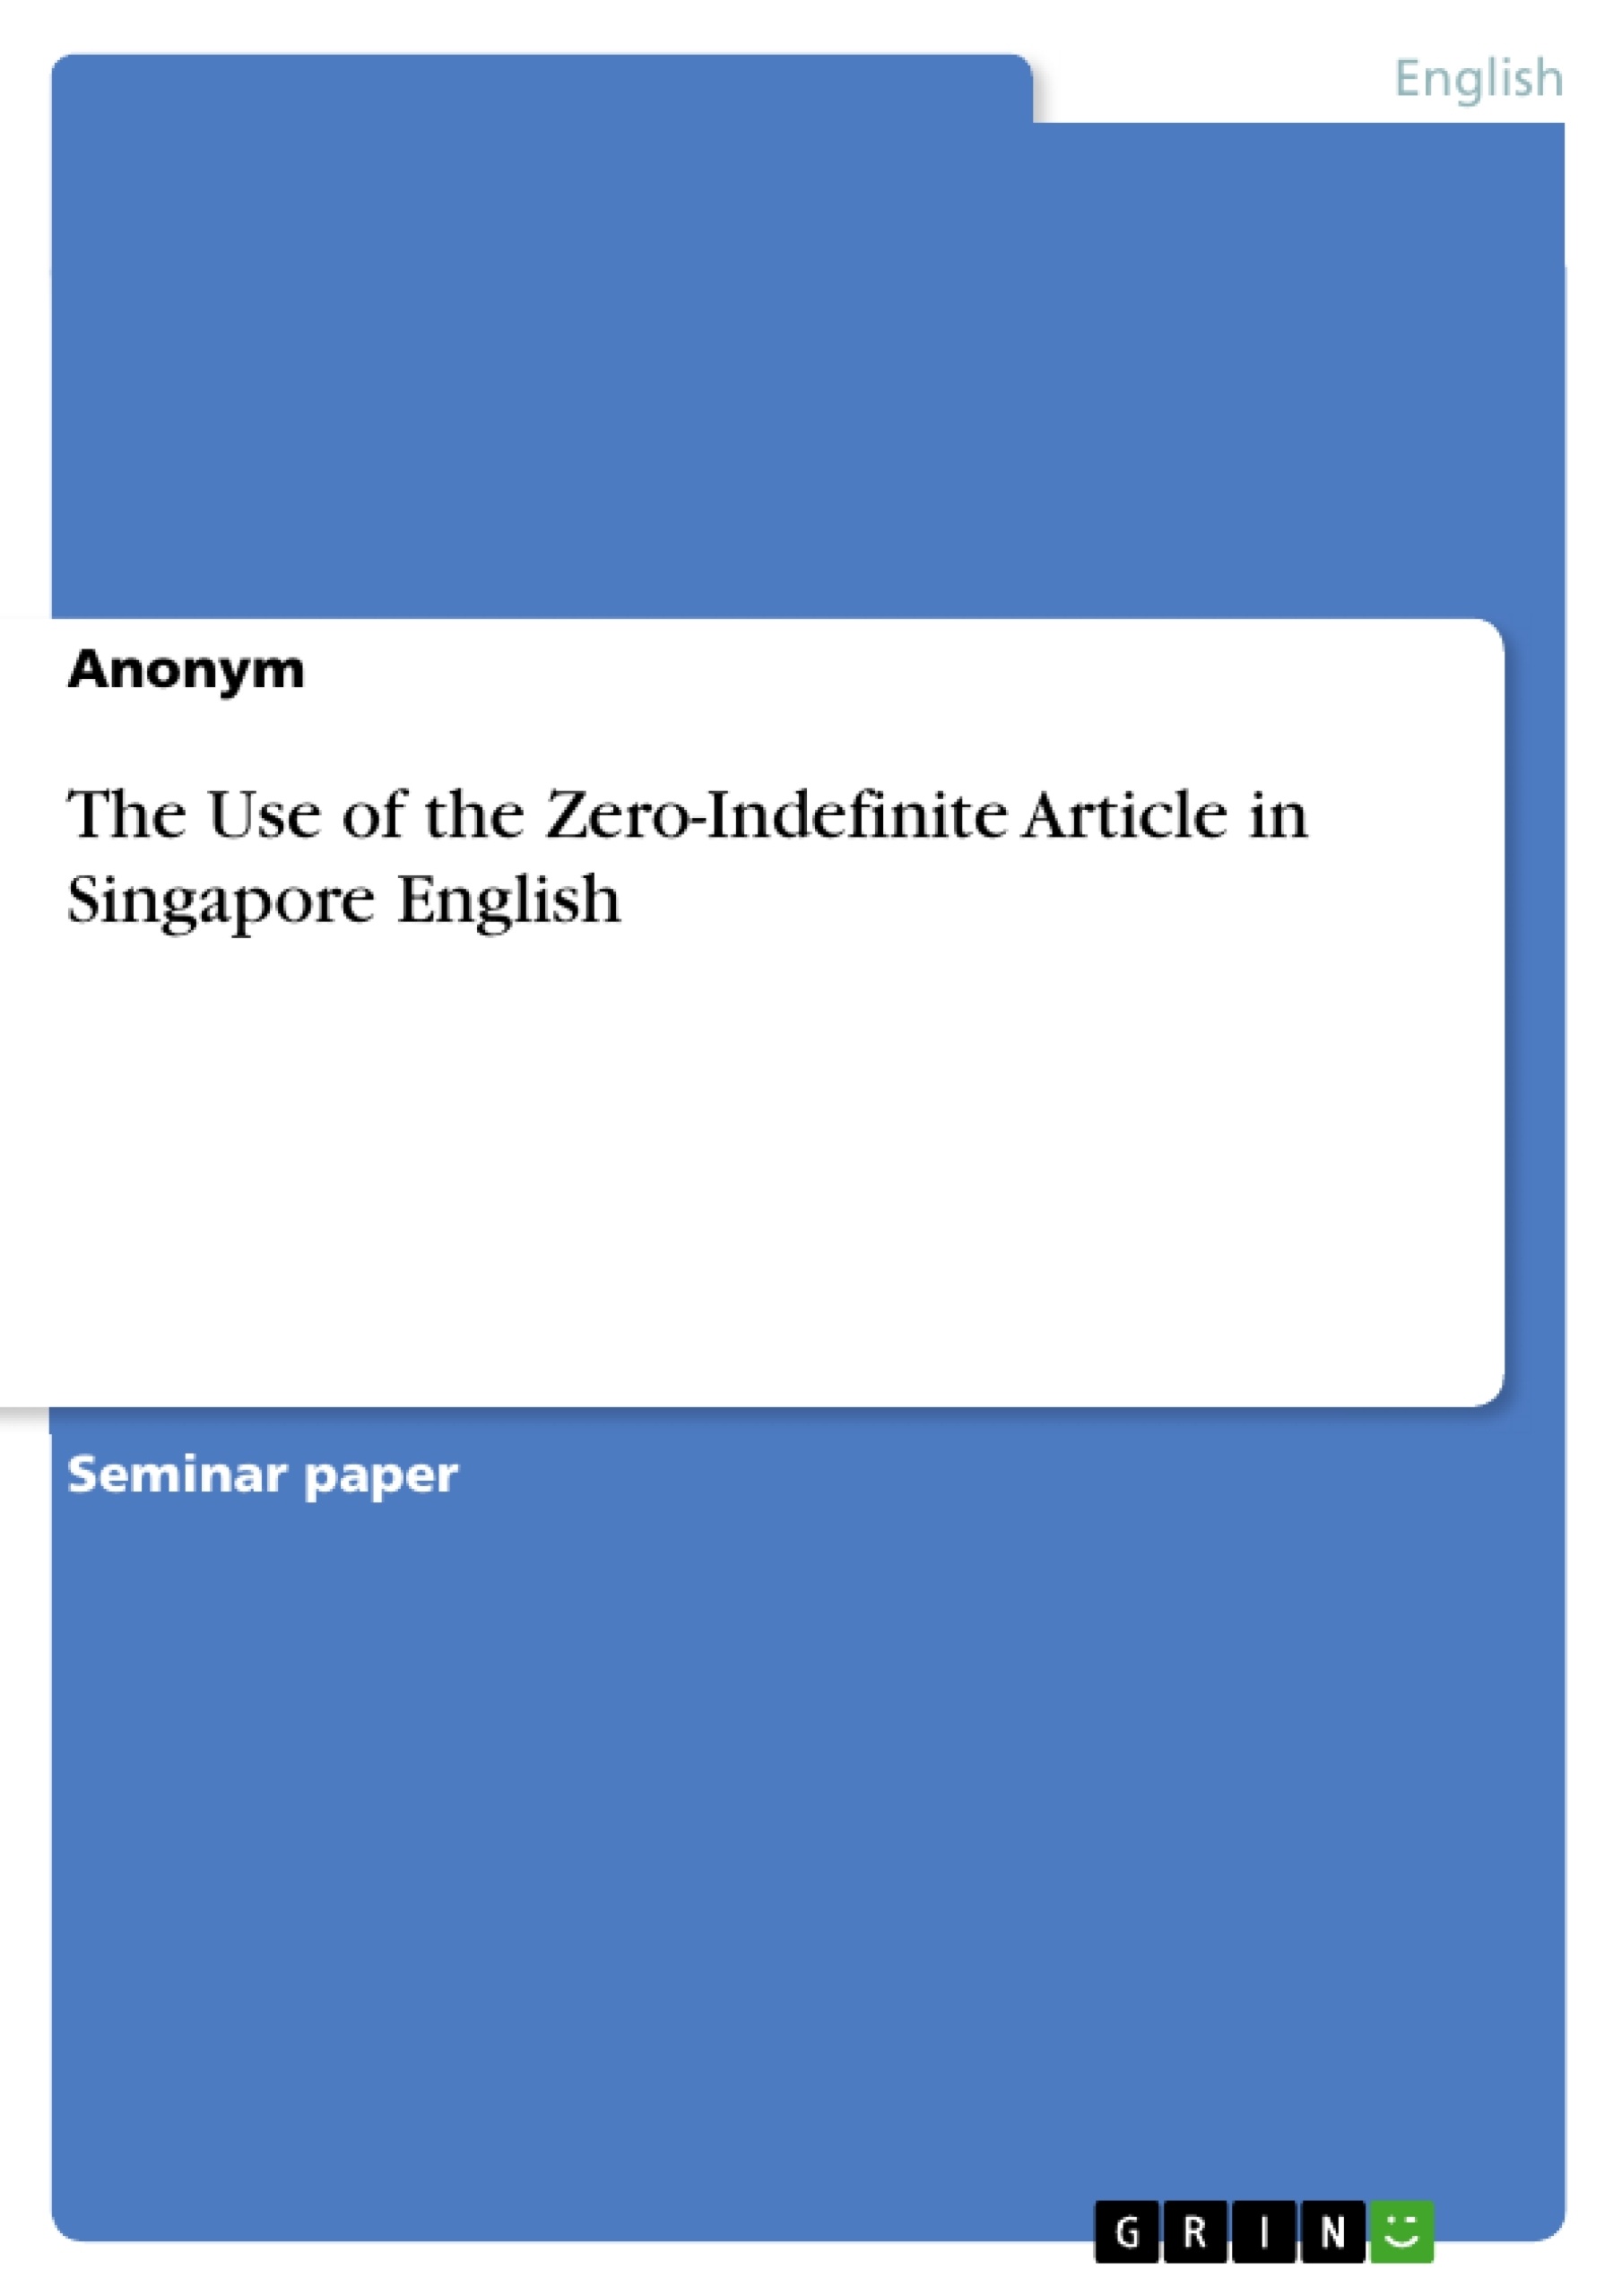 Title: The Use of the Zero-Indefinite Article in Singapore English